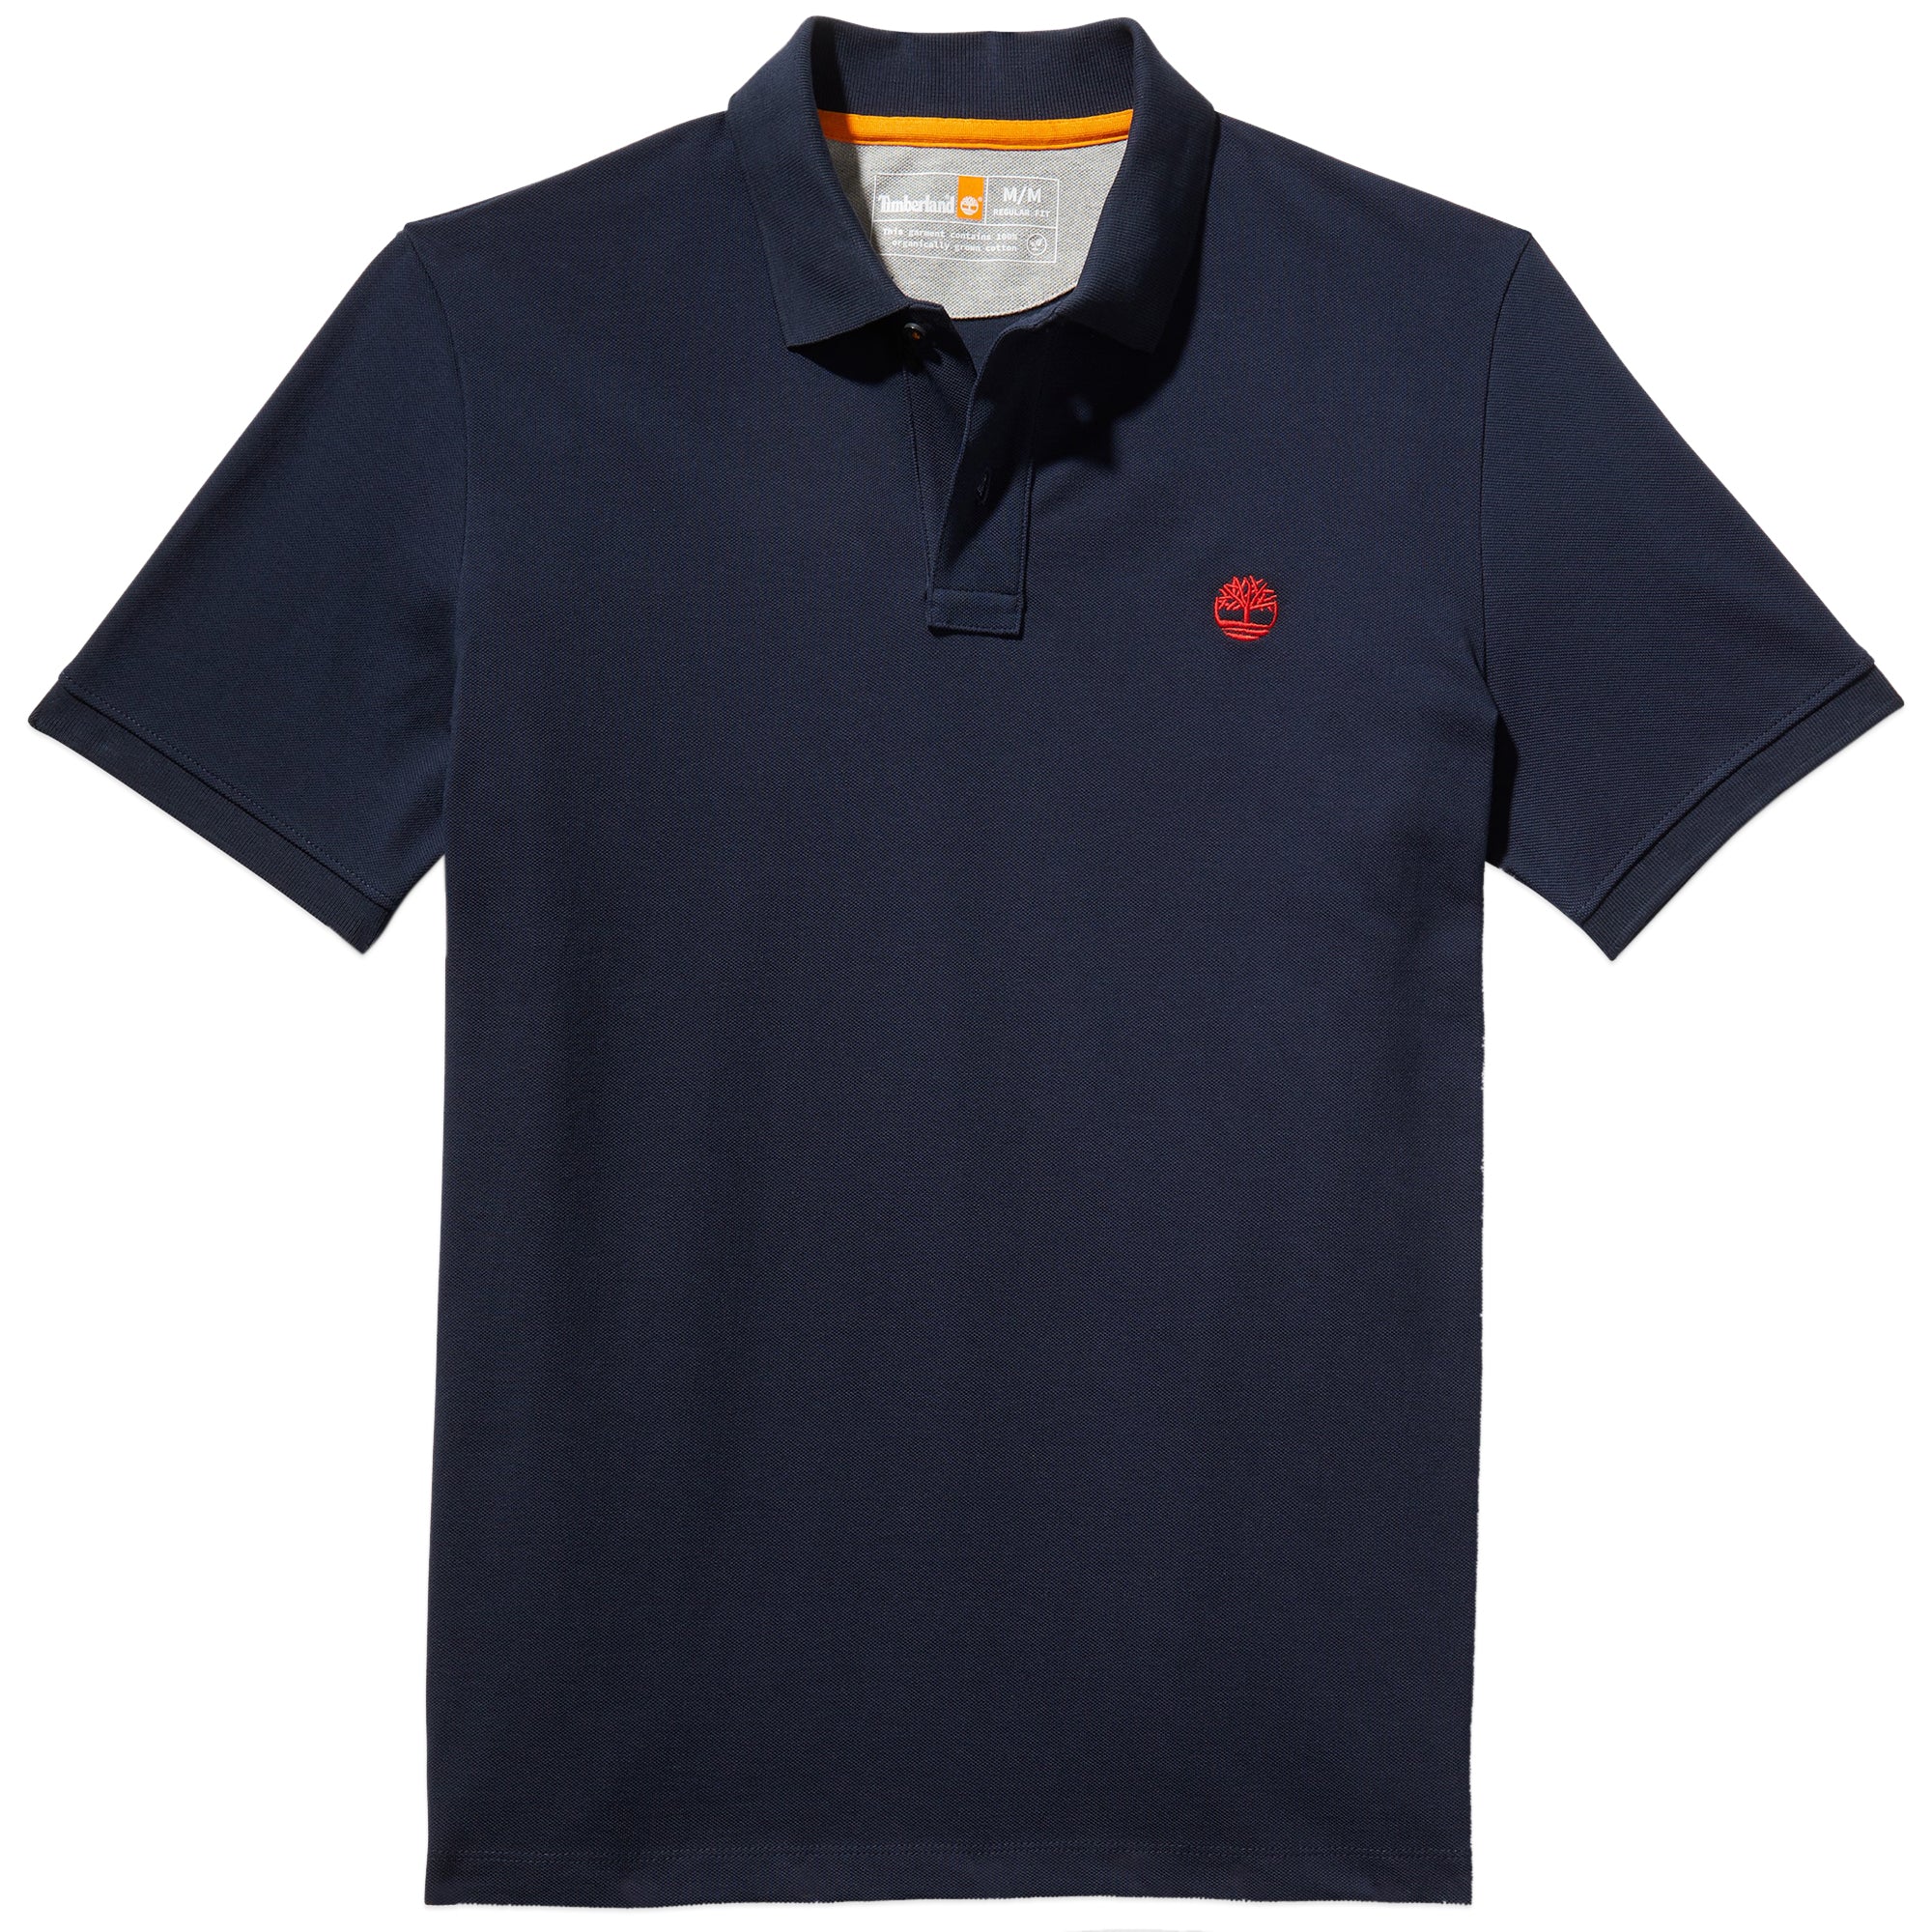 Timberland Millers River Pique Polo - Dark Sapphire